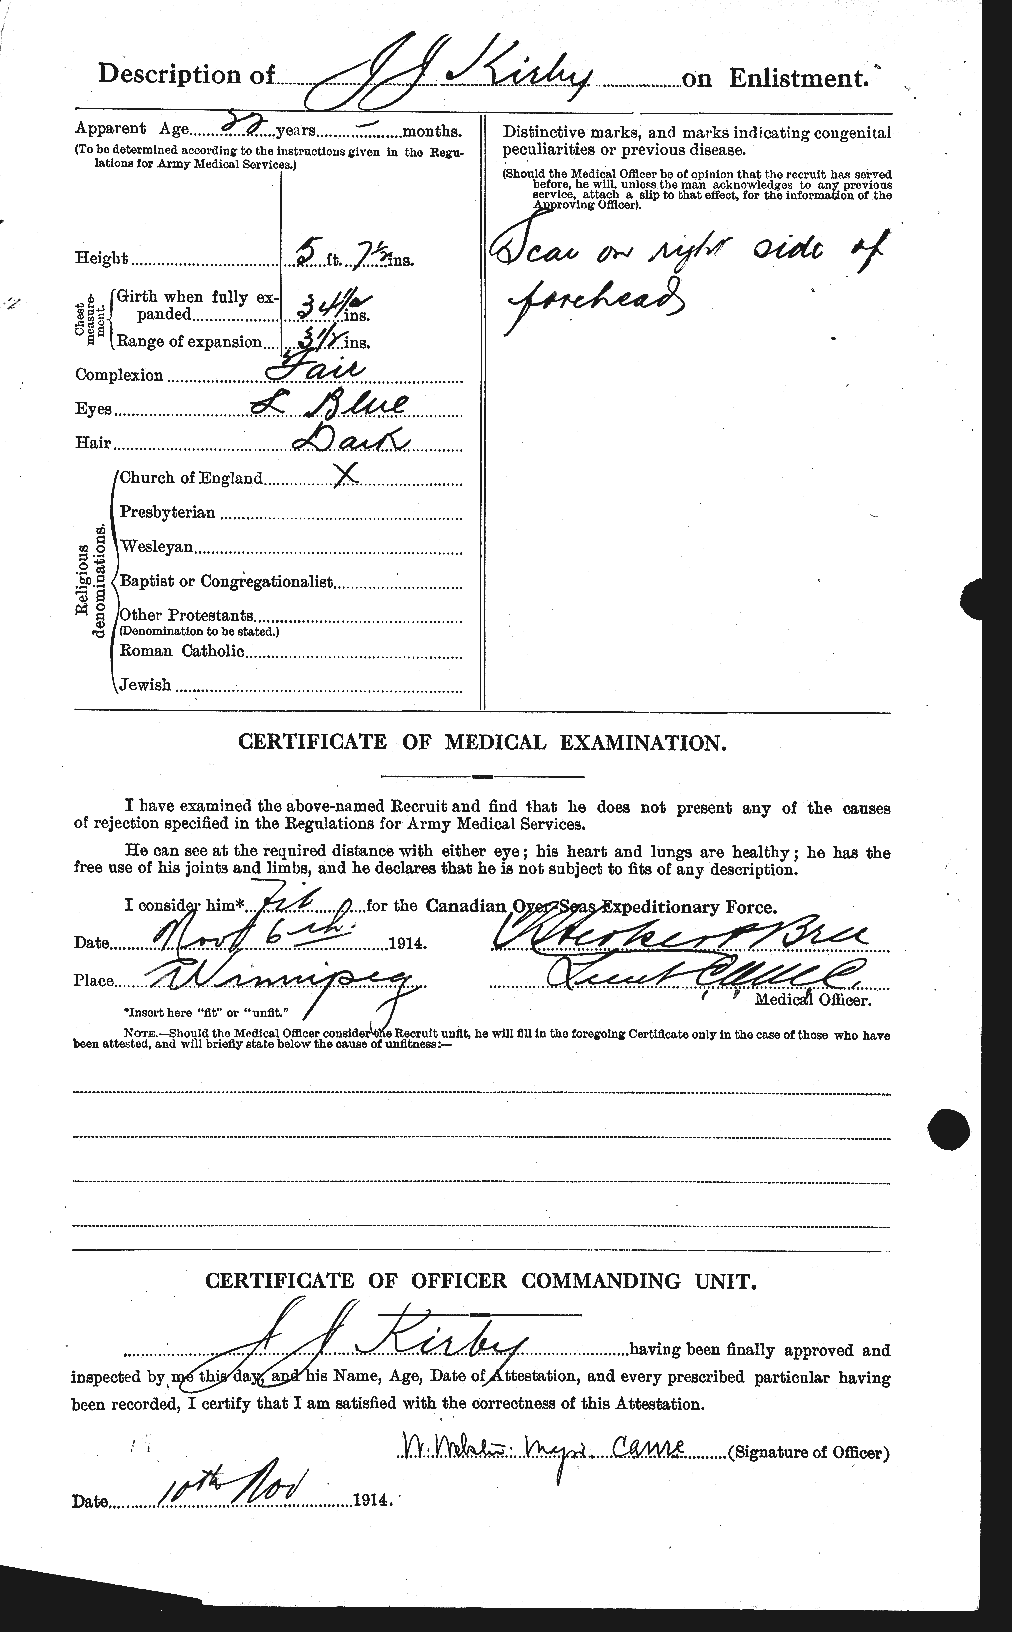 Personnel Records of the First World War - CEF 437220b